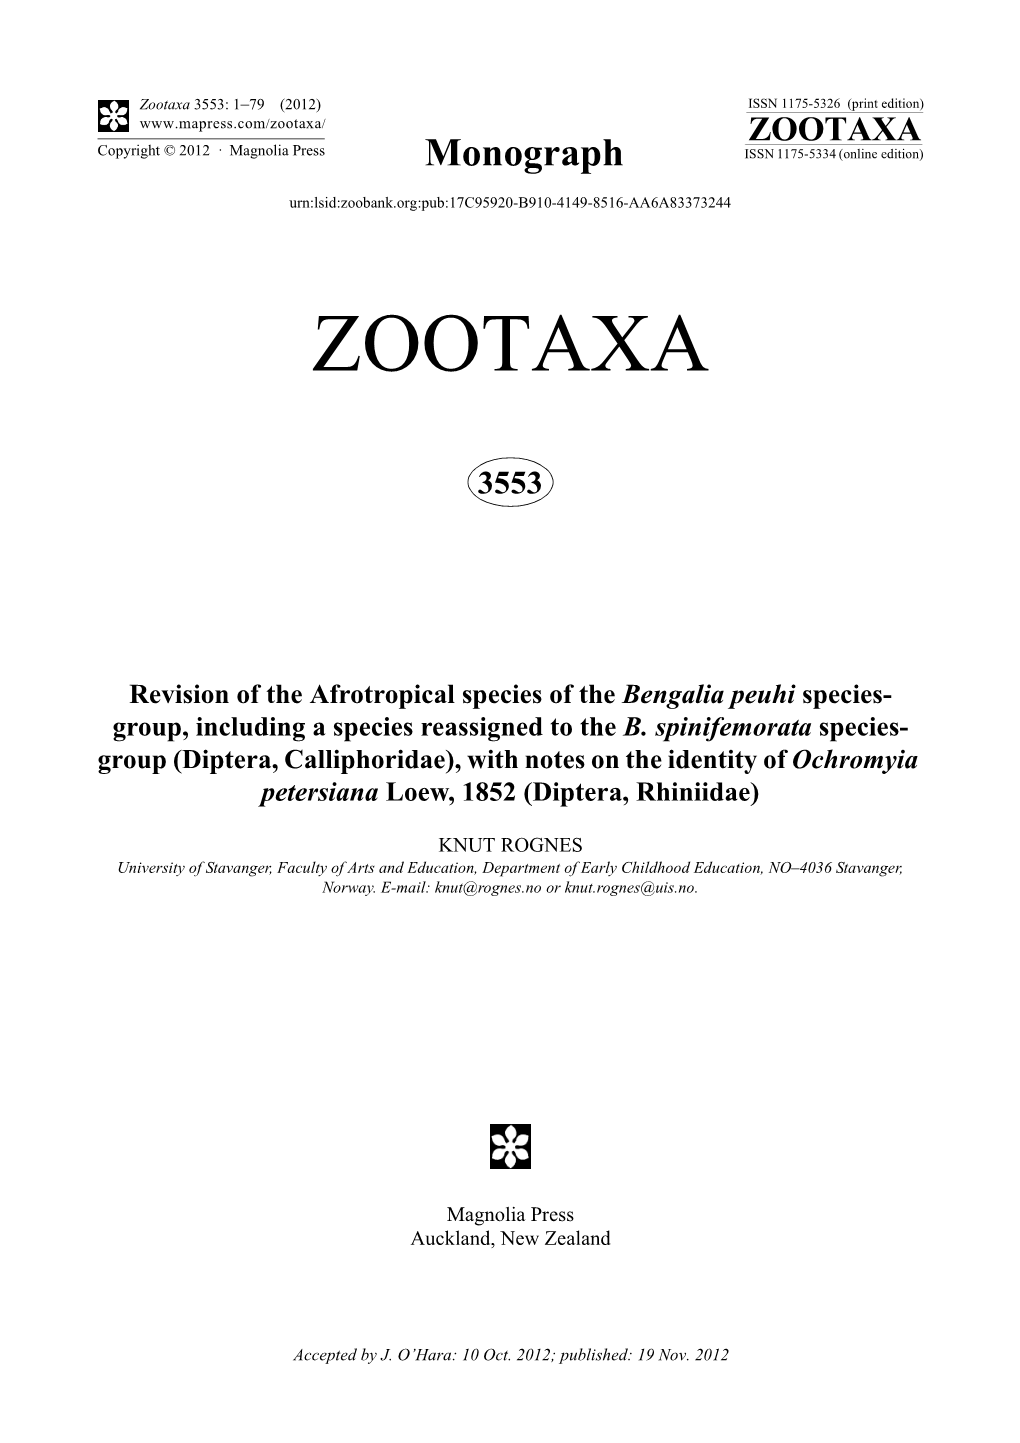 Revision of the Afrotropical Species of the Bengalia Peuhi Speciesgroup